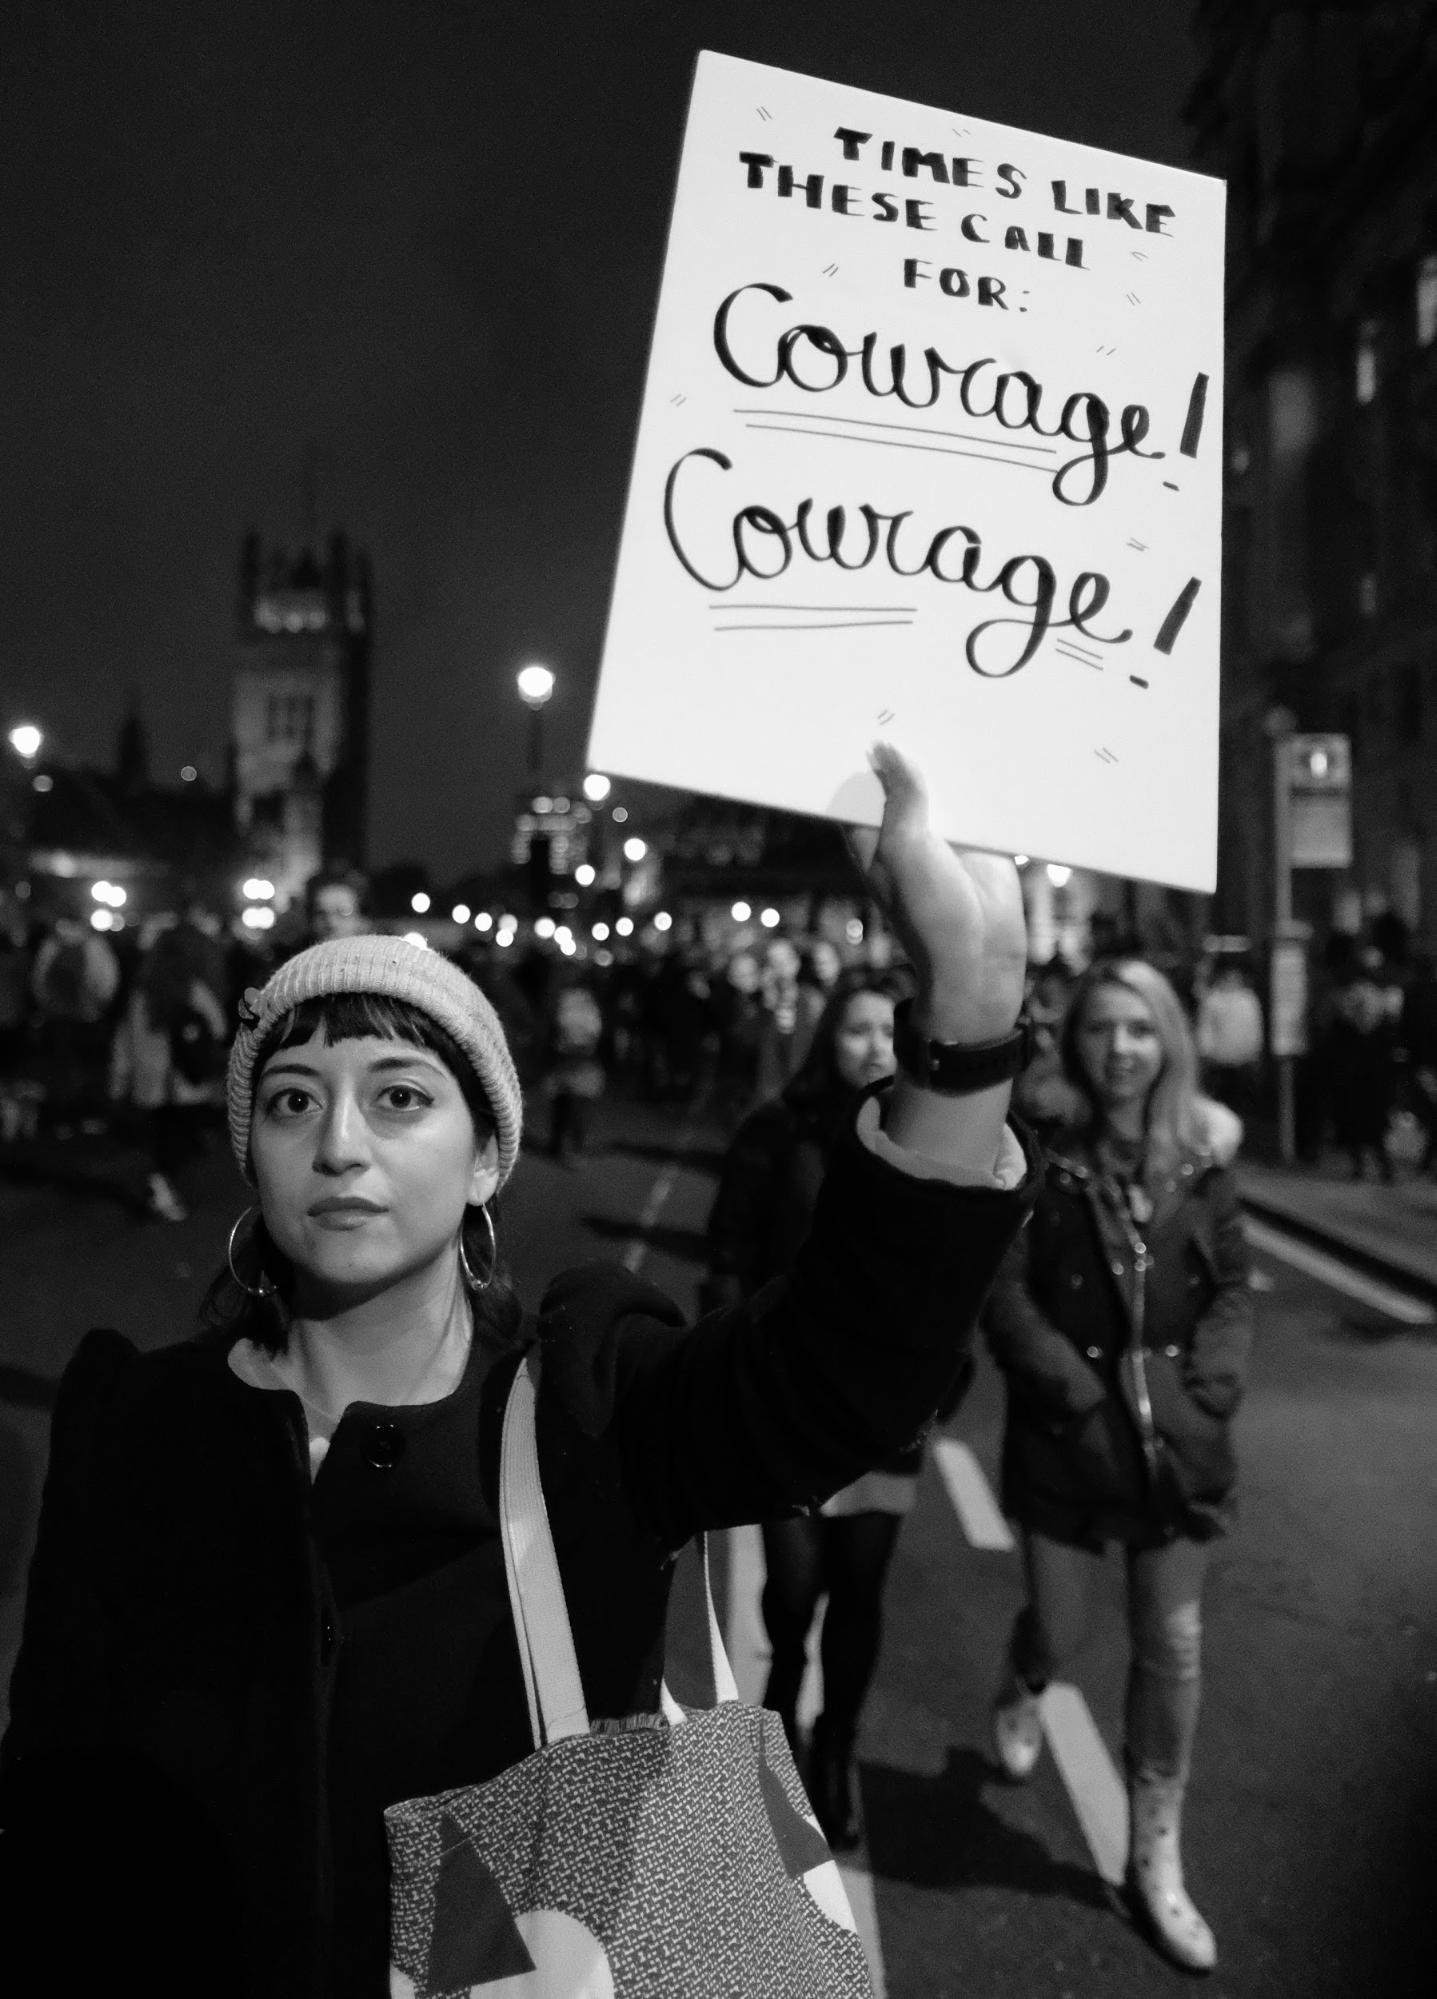 A woman in a march holds a sign saying "Times like these call for courage! Courage!"